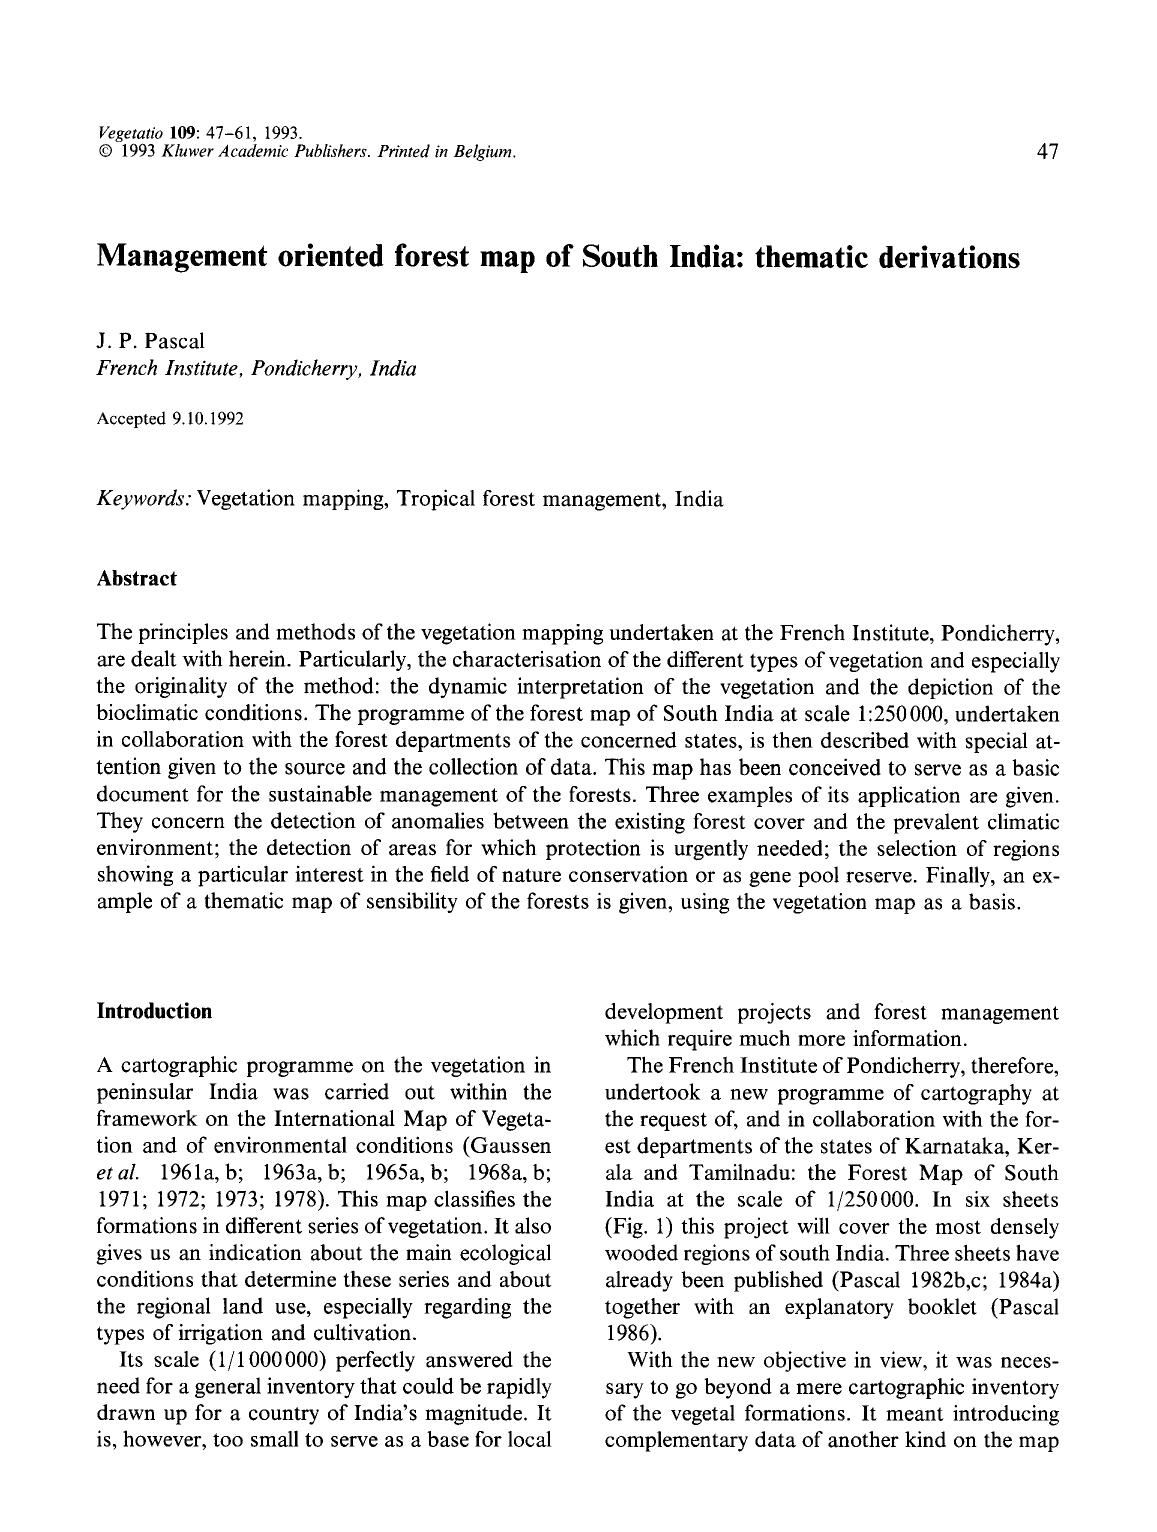 Management oriented forest map of South India: thematic derivations by Unknown